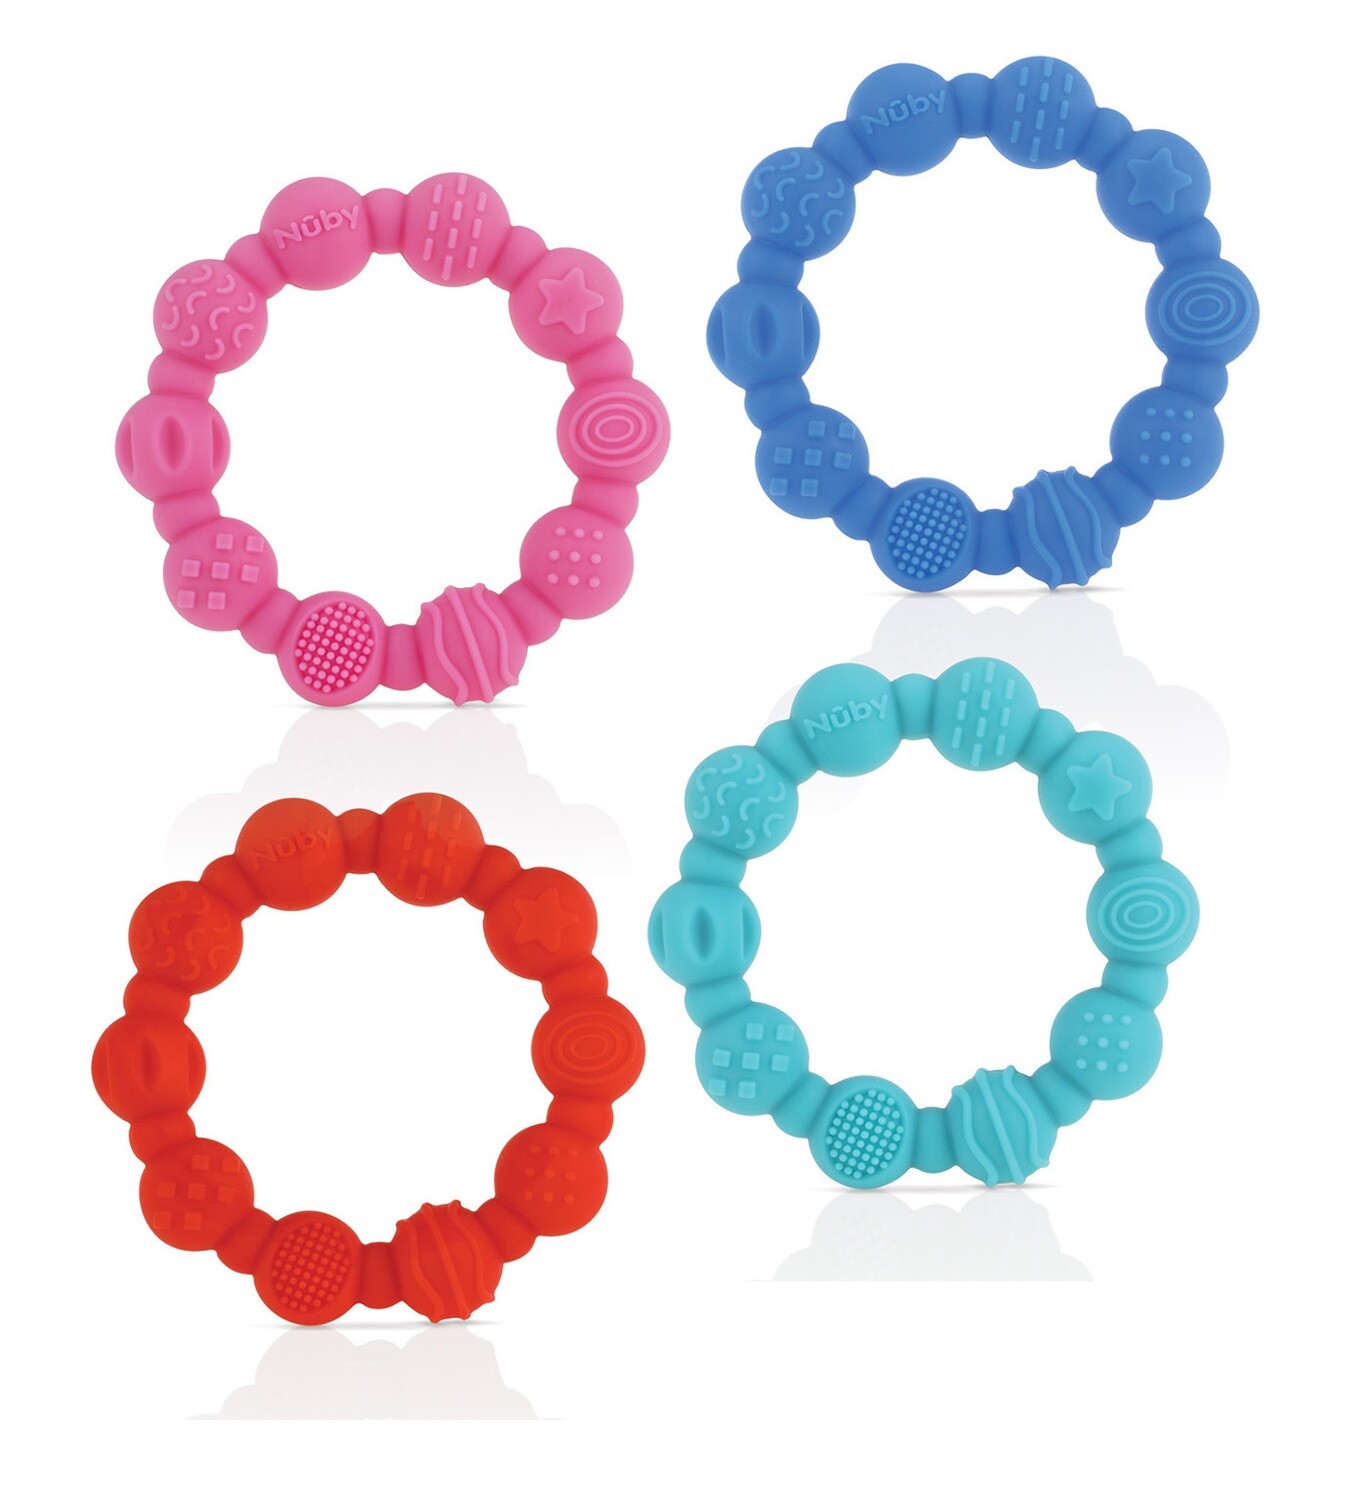 . Case of [64] Nuby? Soothing Teether Ring - Assorted Colors, BPA Free .